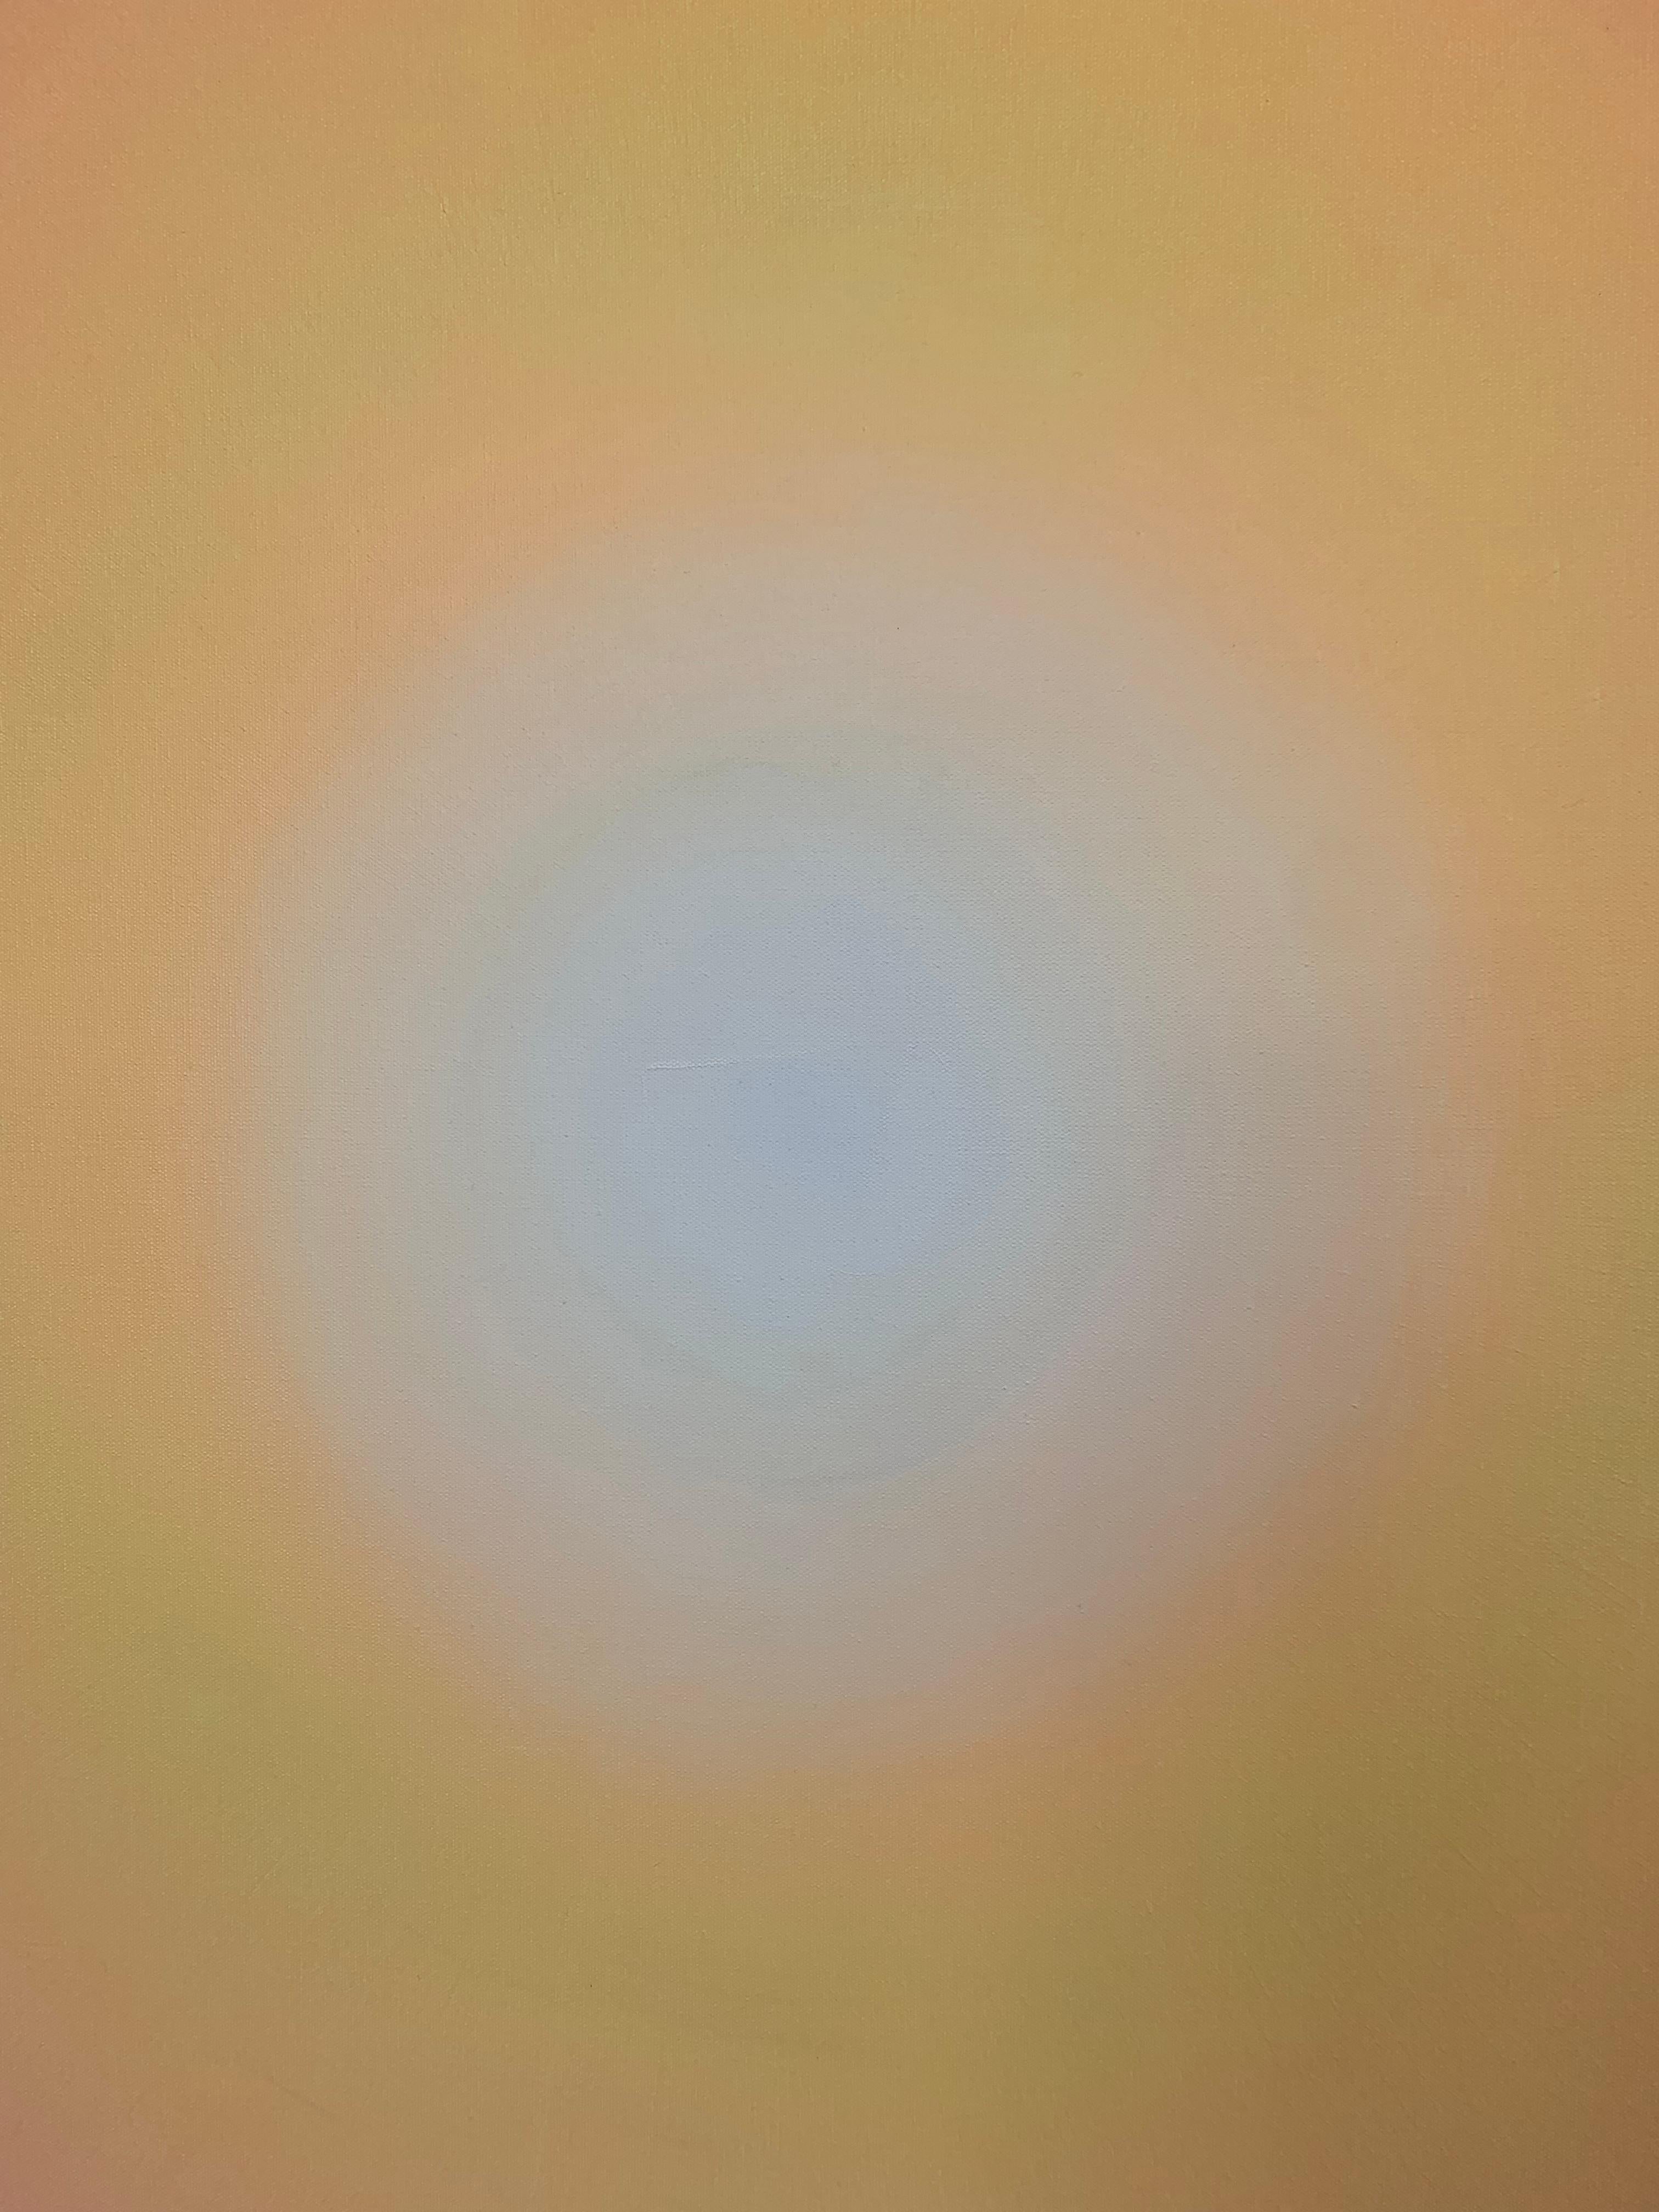 This square edge filled canvas presents a warm-fuzzy of perfectly blended pigment. “Just Peachy” is from the “Mindfulness Circle” series by artist Ethan Blu, one of the most collectible new talents in the US! Originally from the Chicago area, Ethan